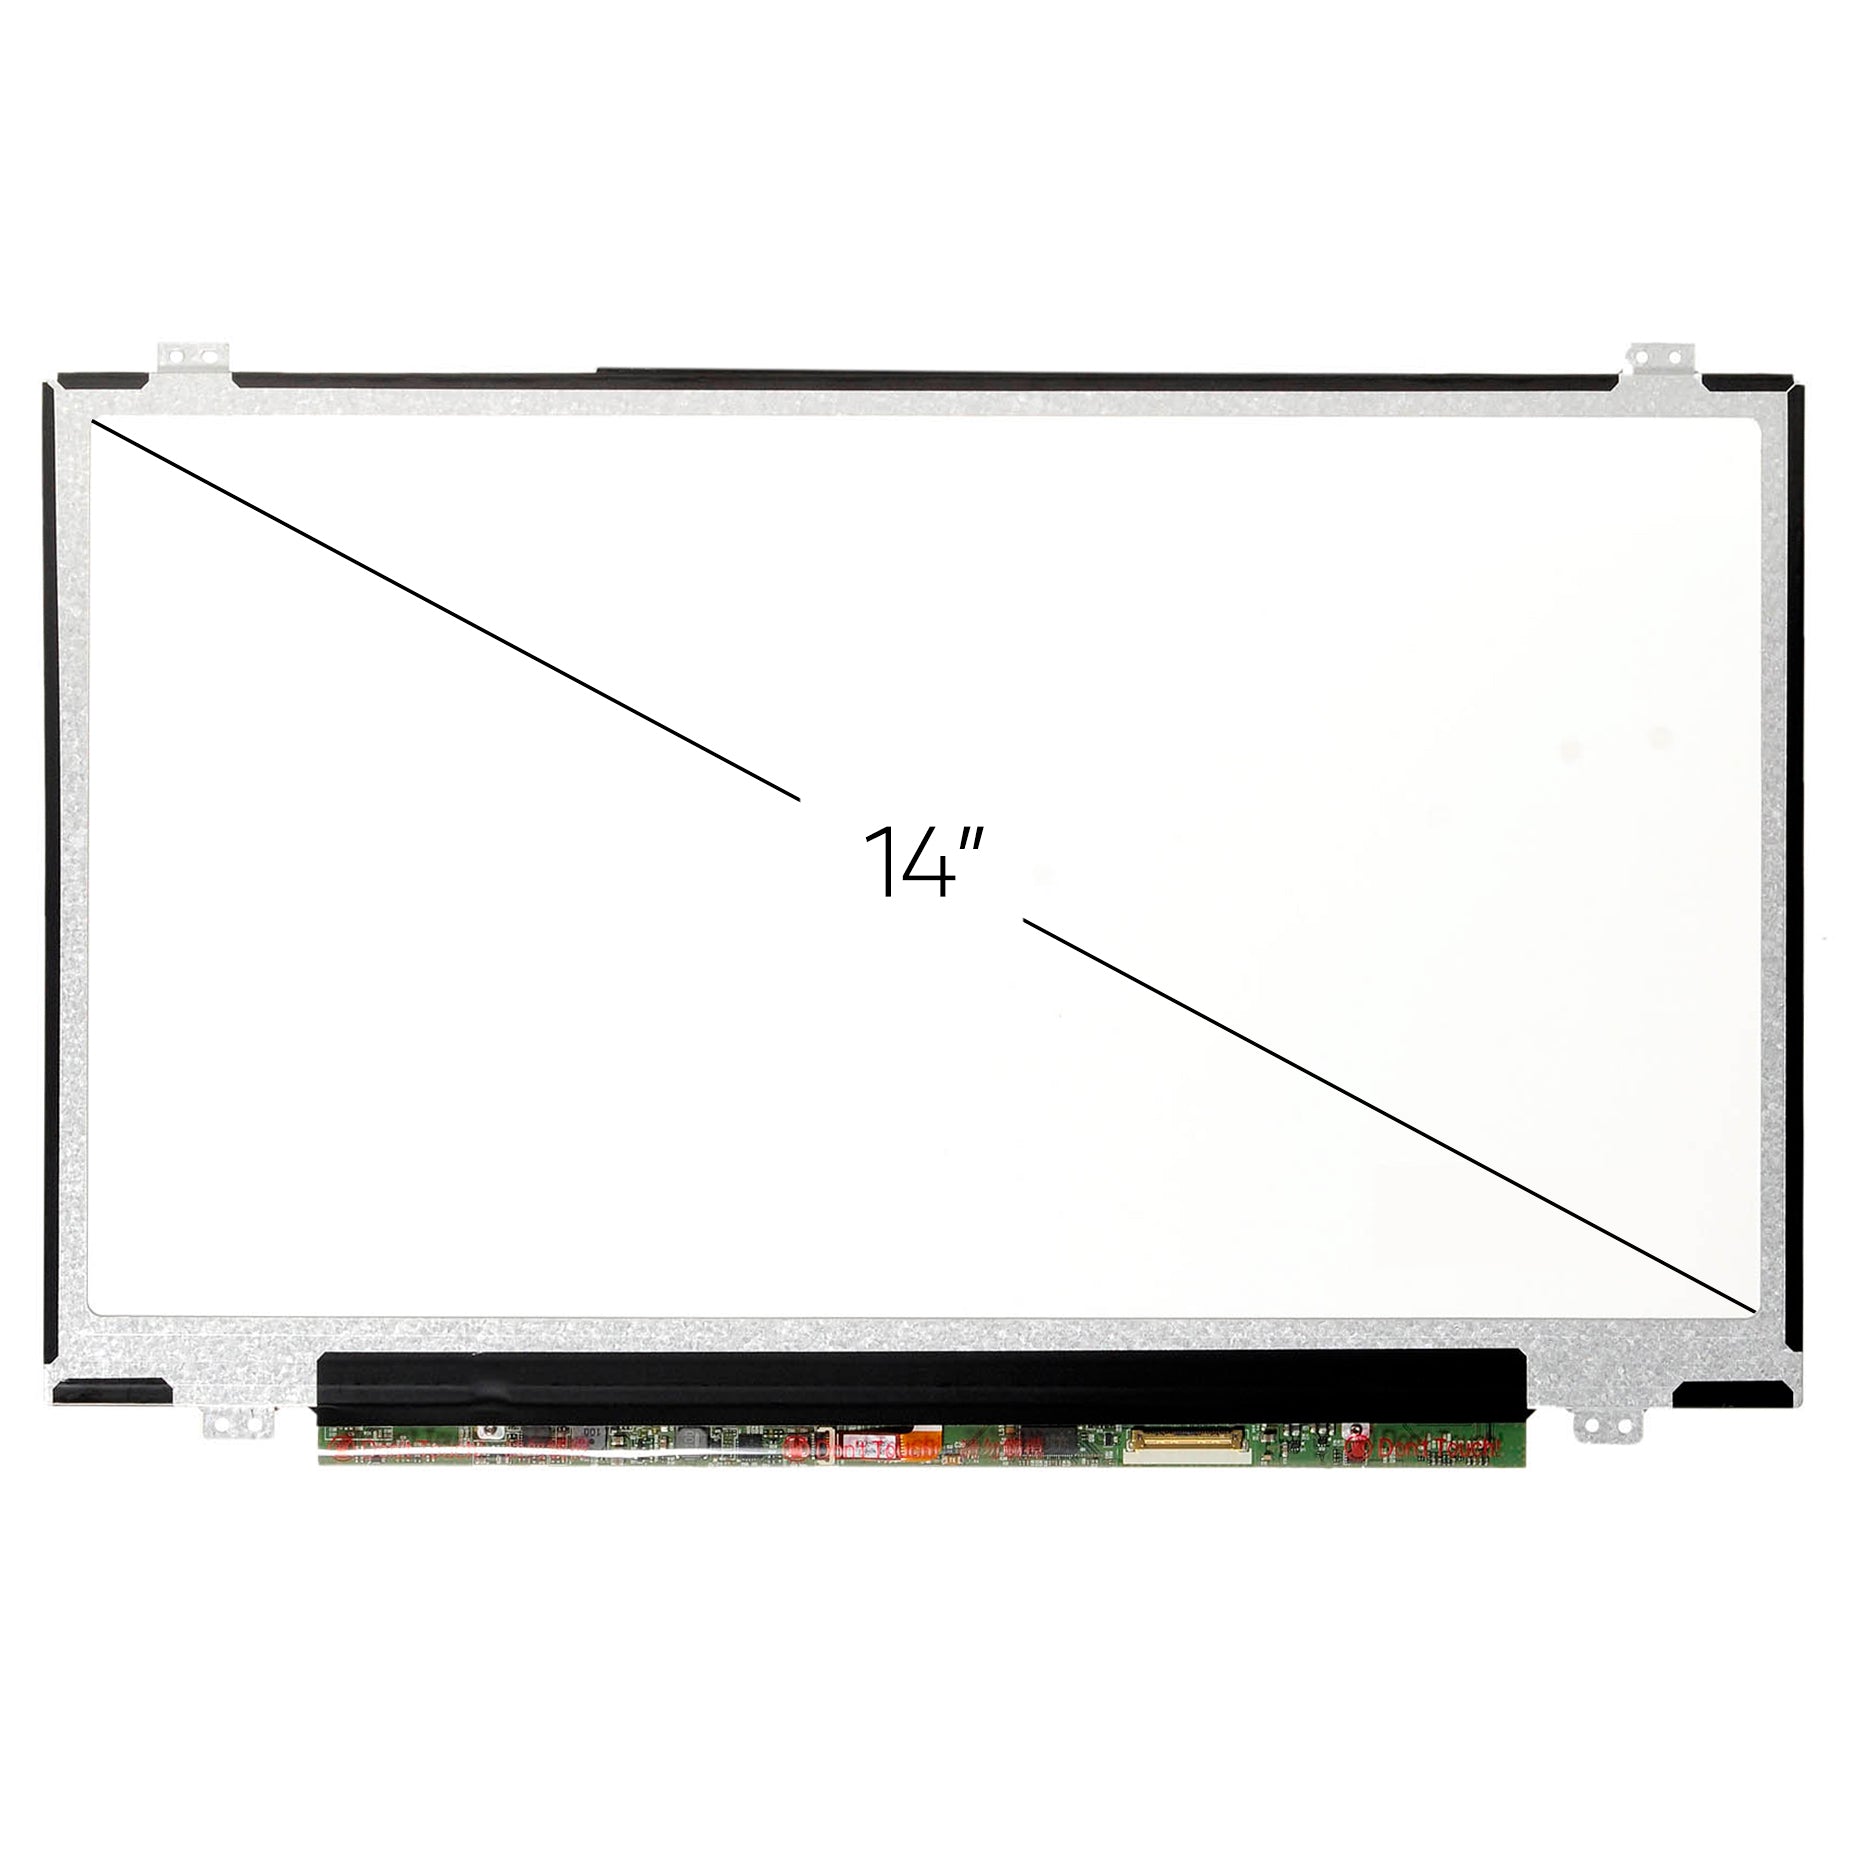 Screen Replacement for HP Chromebook 14-AK040WM FHD 1920x1080 IPS Matte LCD LED Display